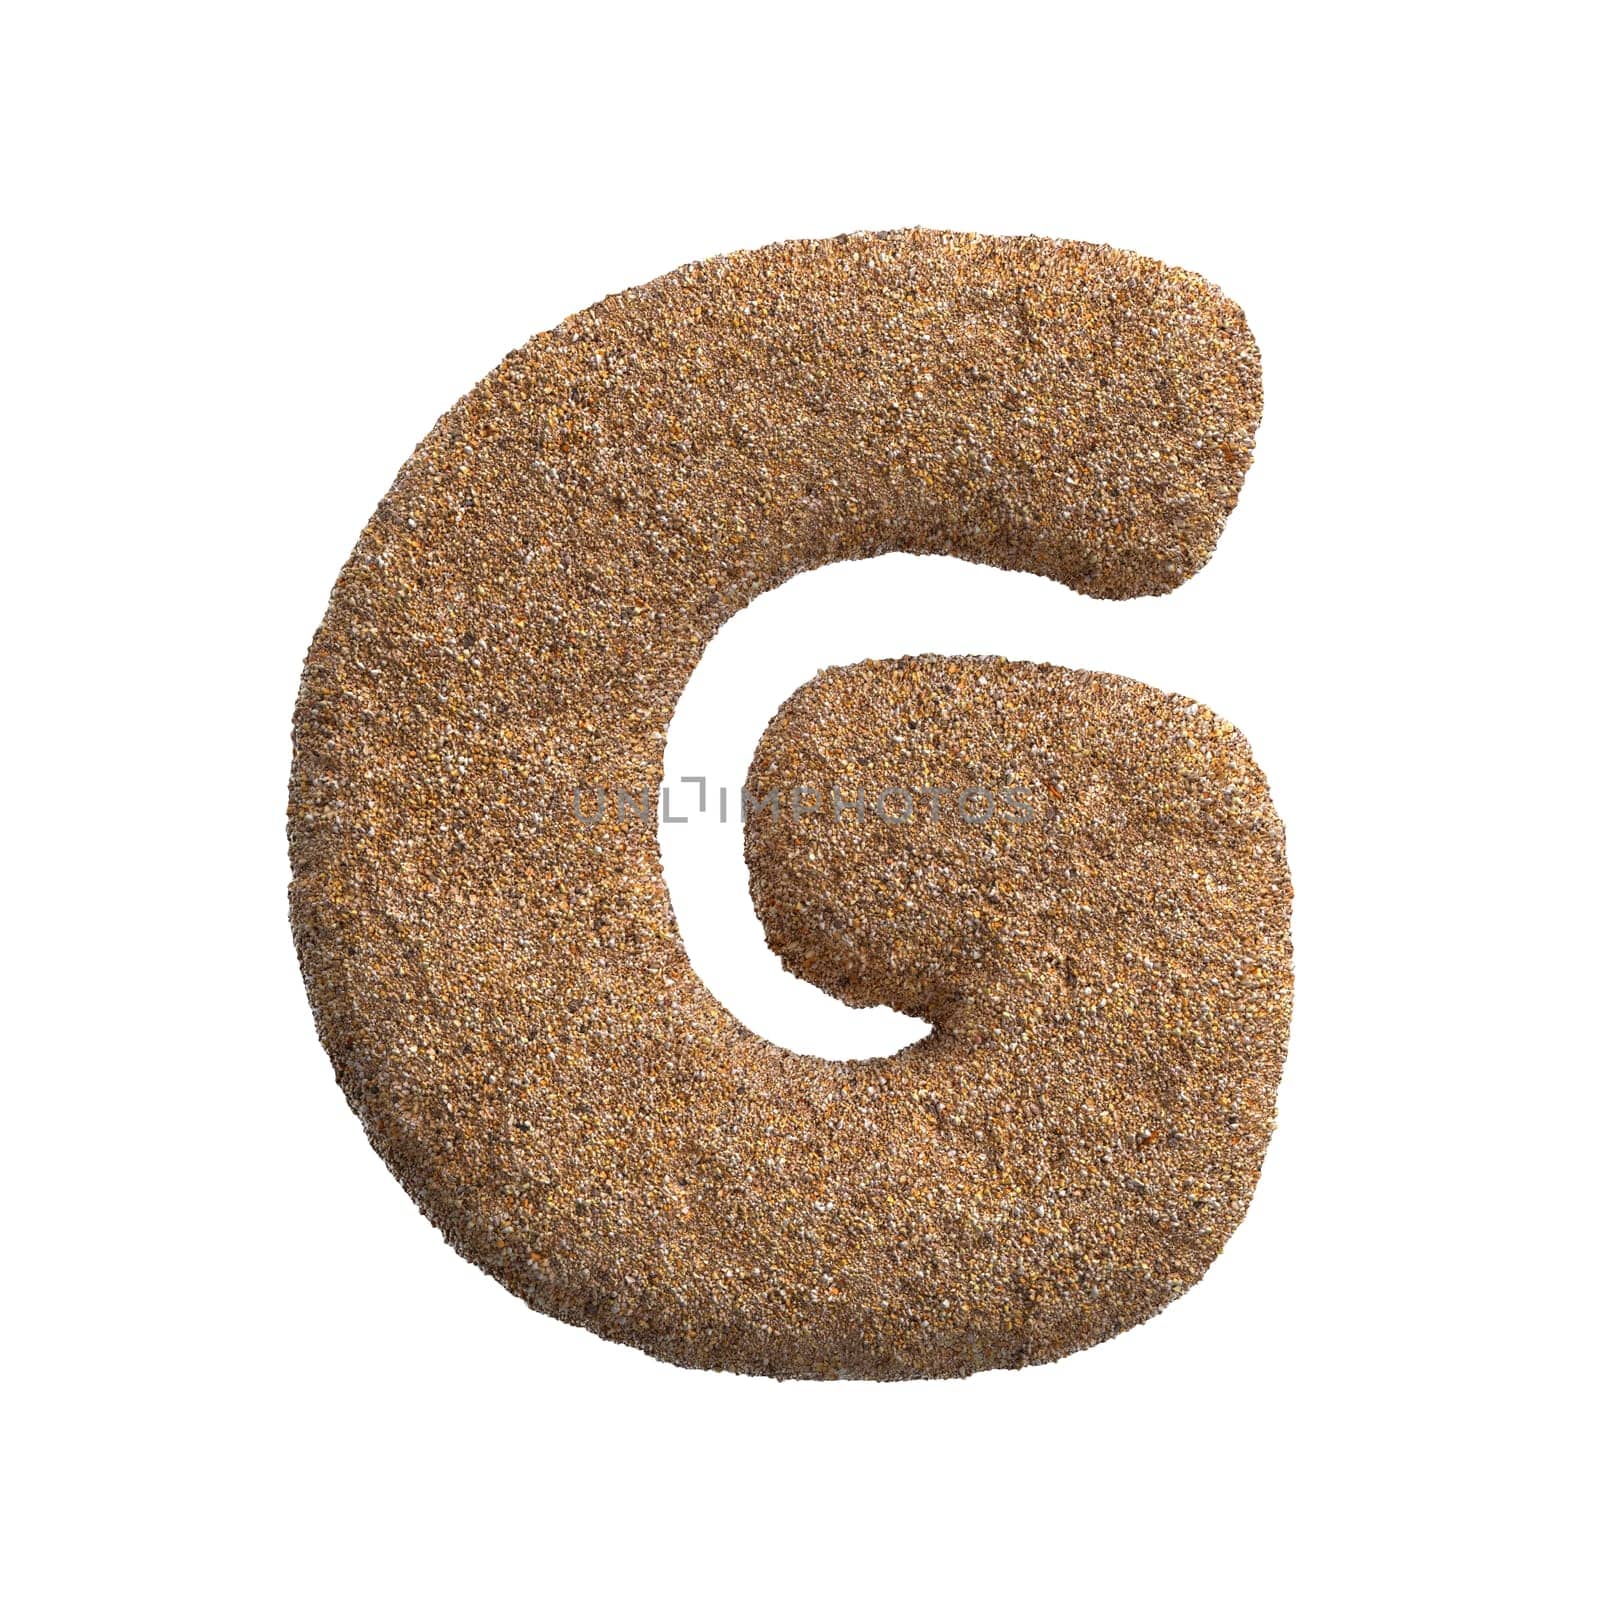 Sand letter G - Capital 3d beach font - Holidays, travel or ocean concepts by chrisroll